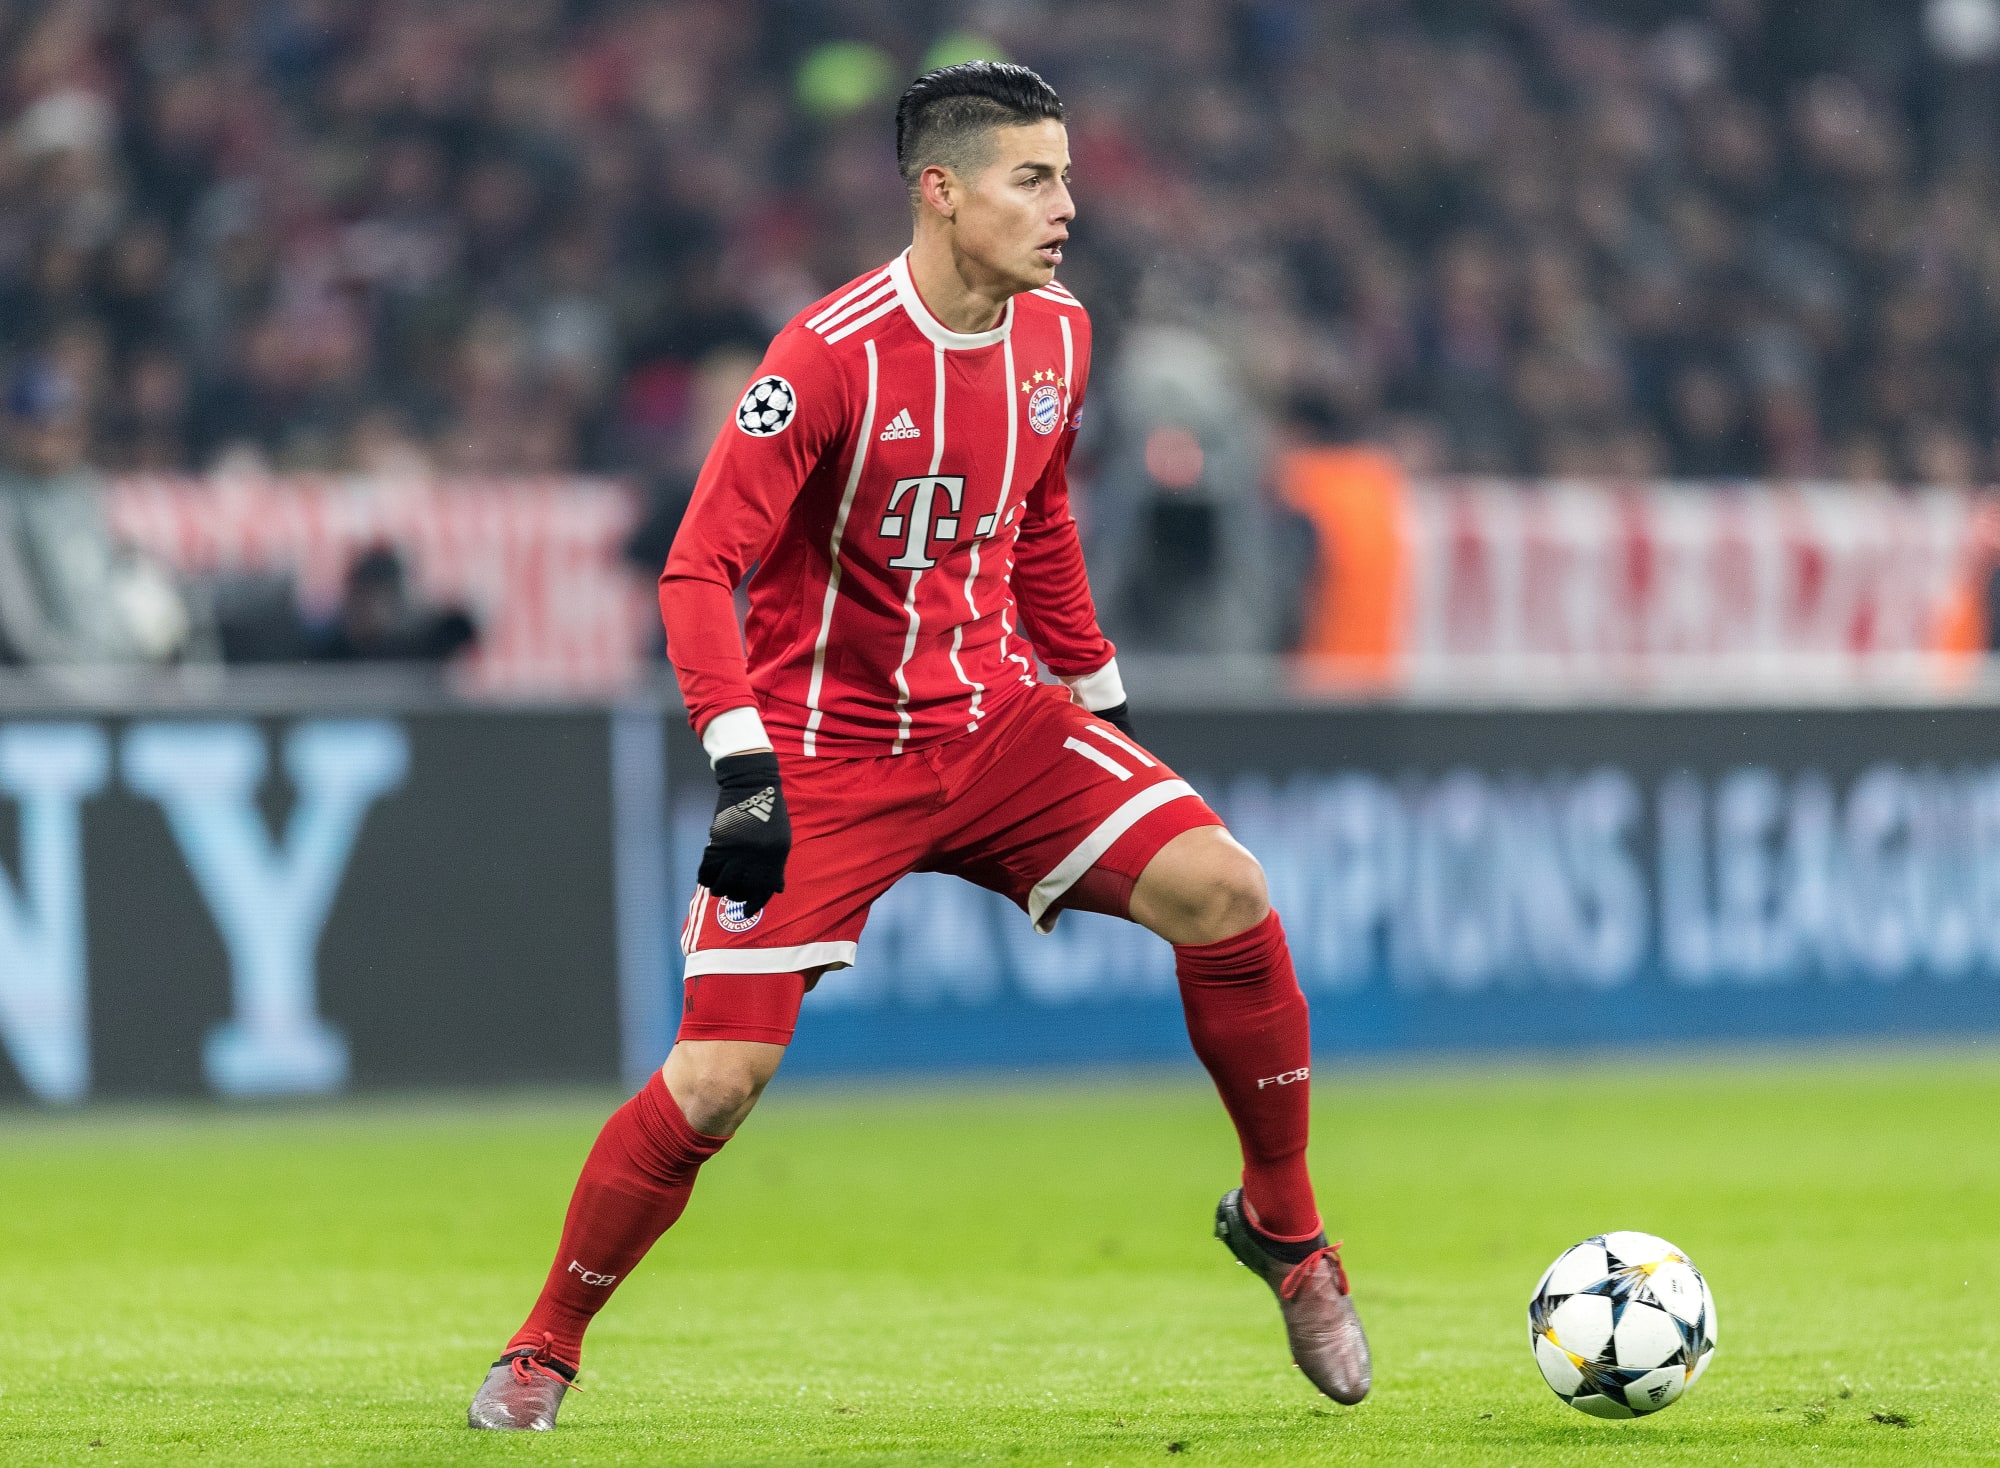 Bayern Munich have not yet decided about signing James Rodriguez